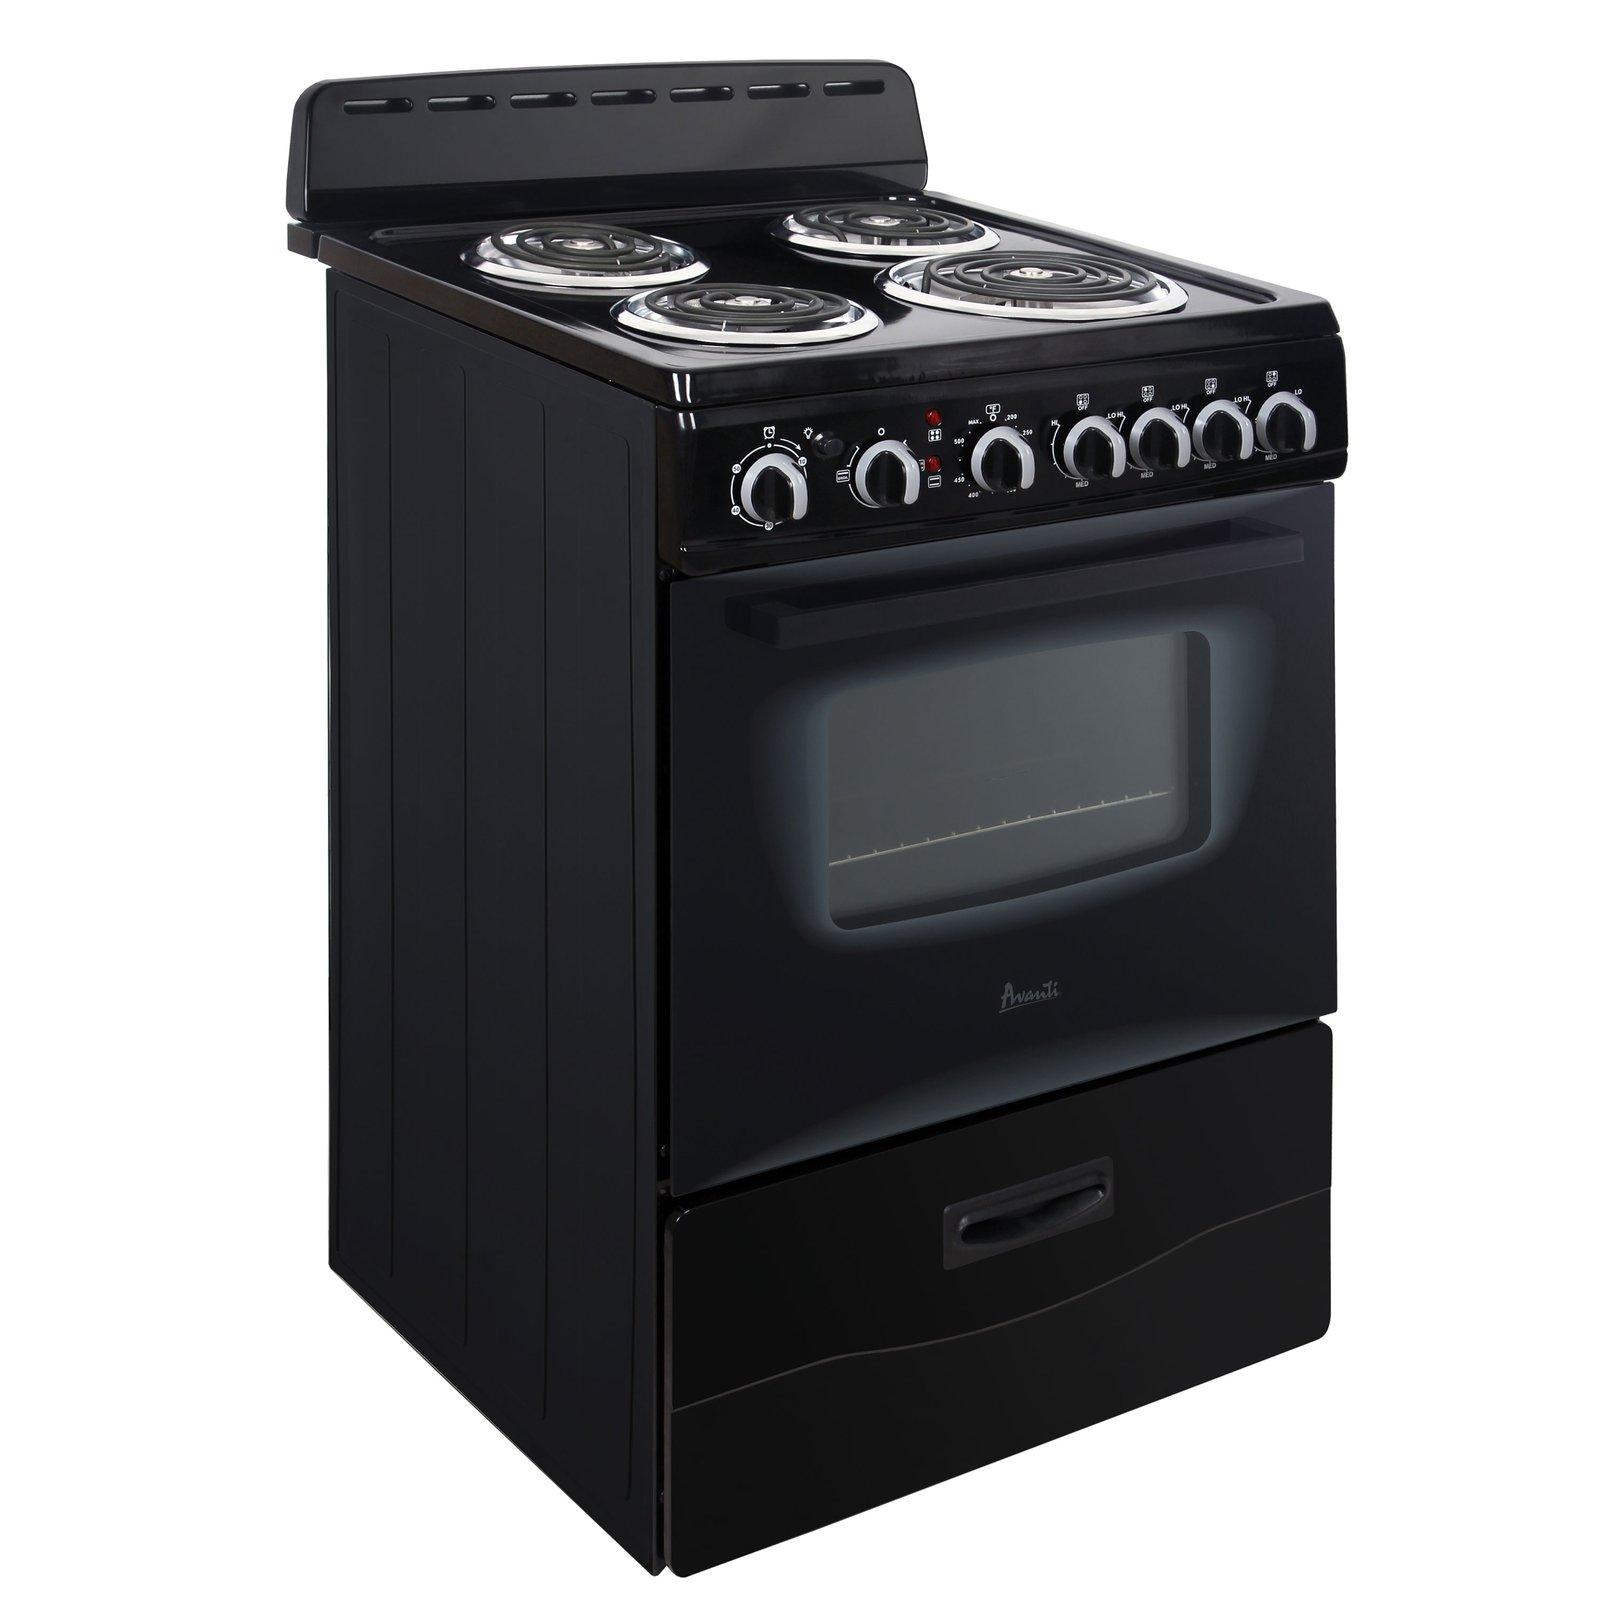 Avanti 24" Electric Range Oven with Framed Glass Door - White / 2.6 cu. ft.